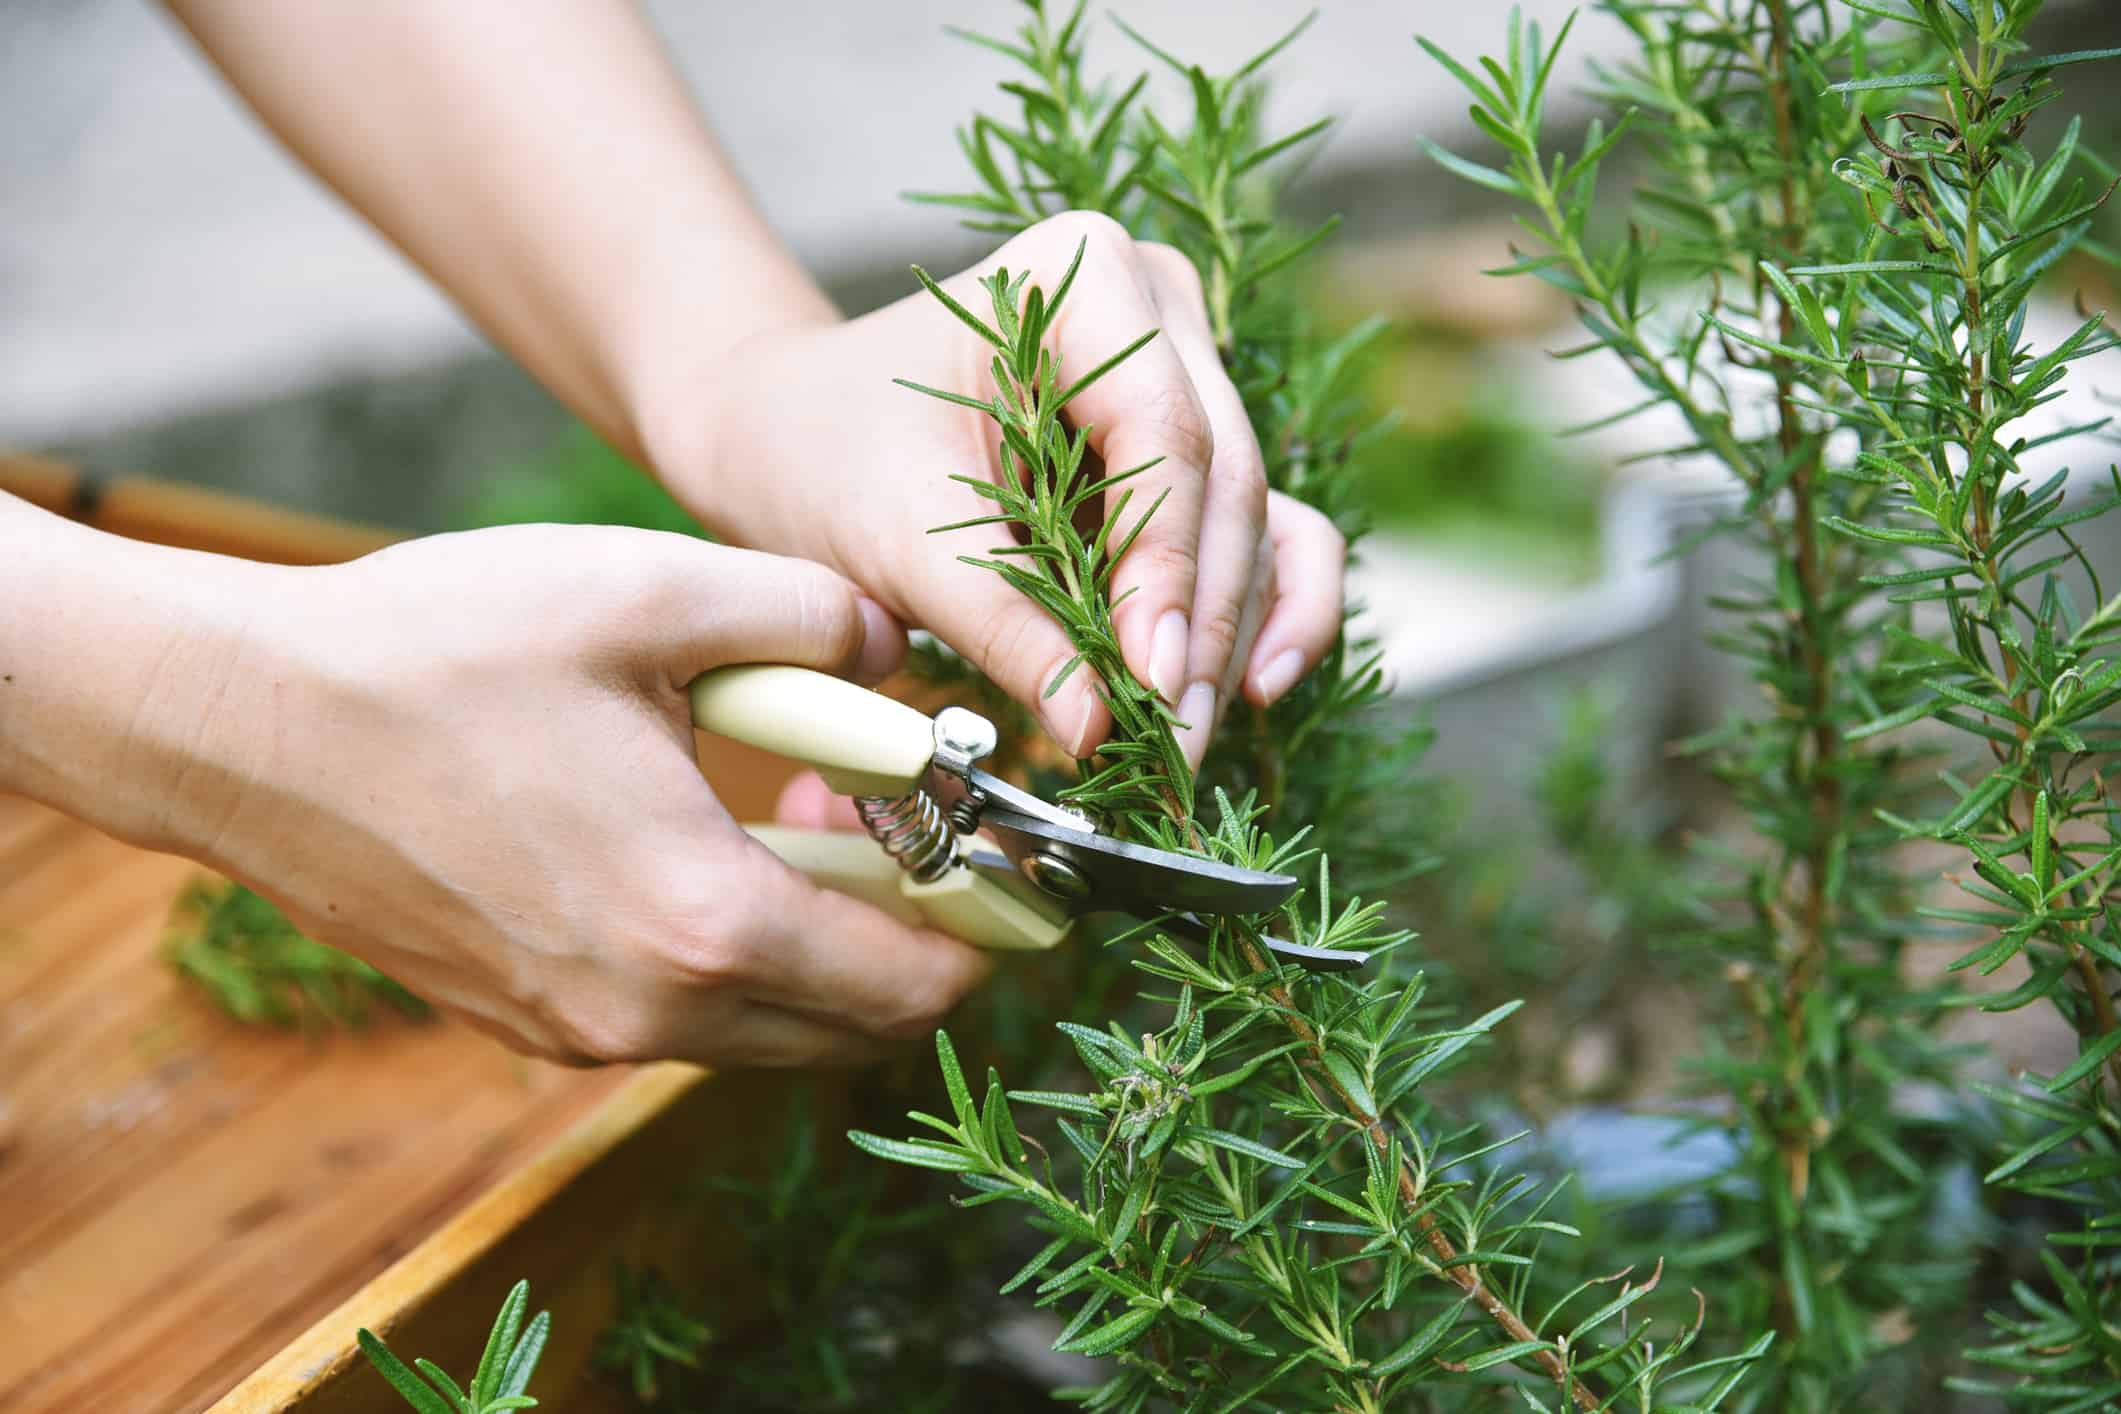 Rosemary - growing, care and harvesting rosemary